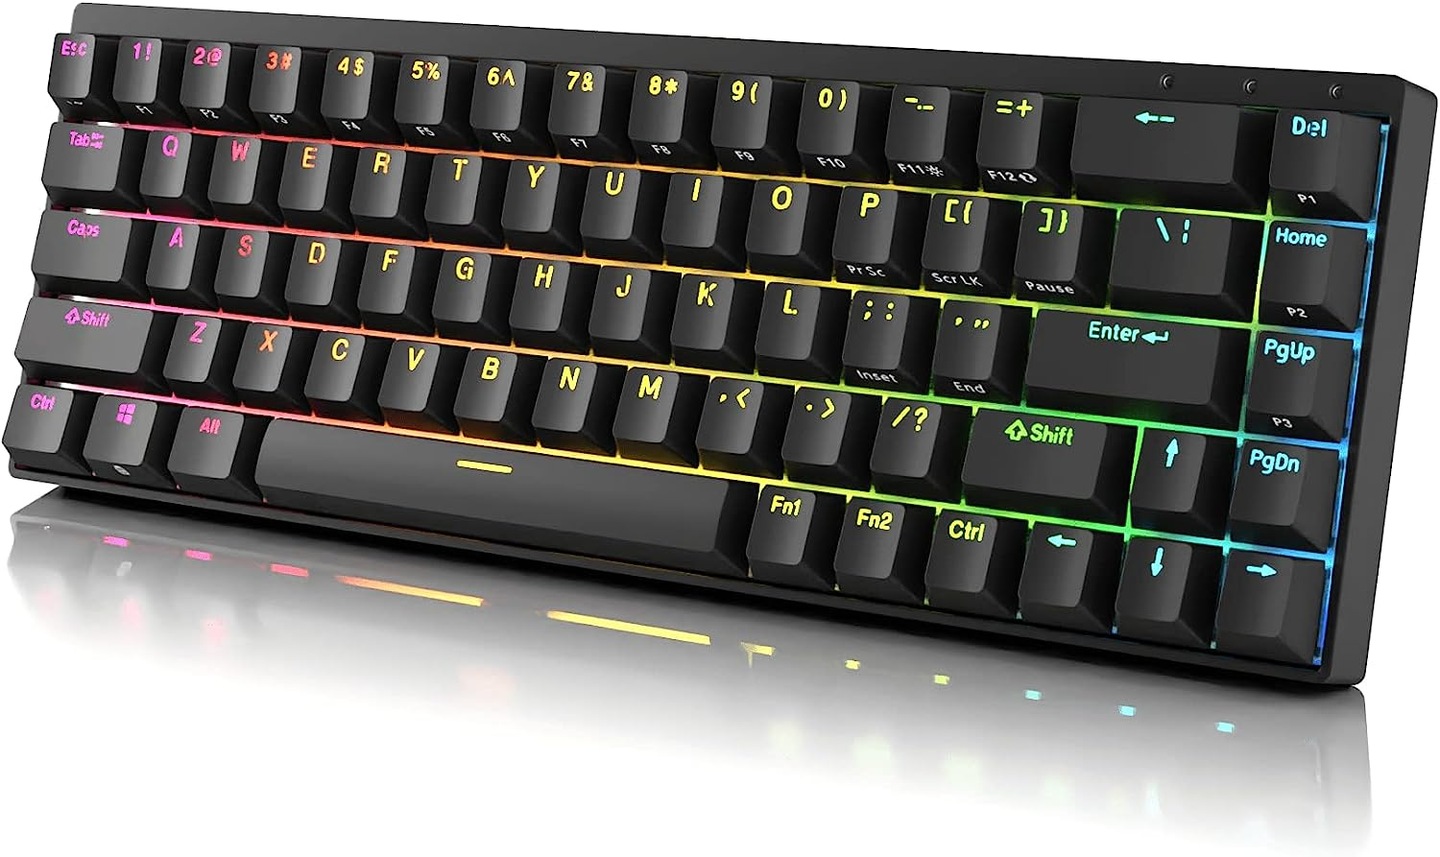 Keyboard for Gaming: A Powerful Tool to Reach the Pinnacle of Gaming